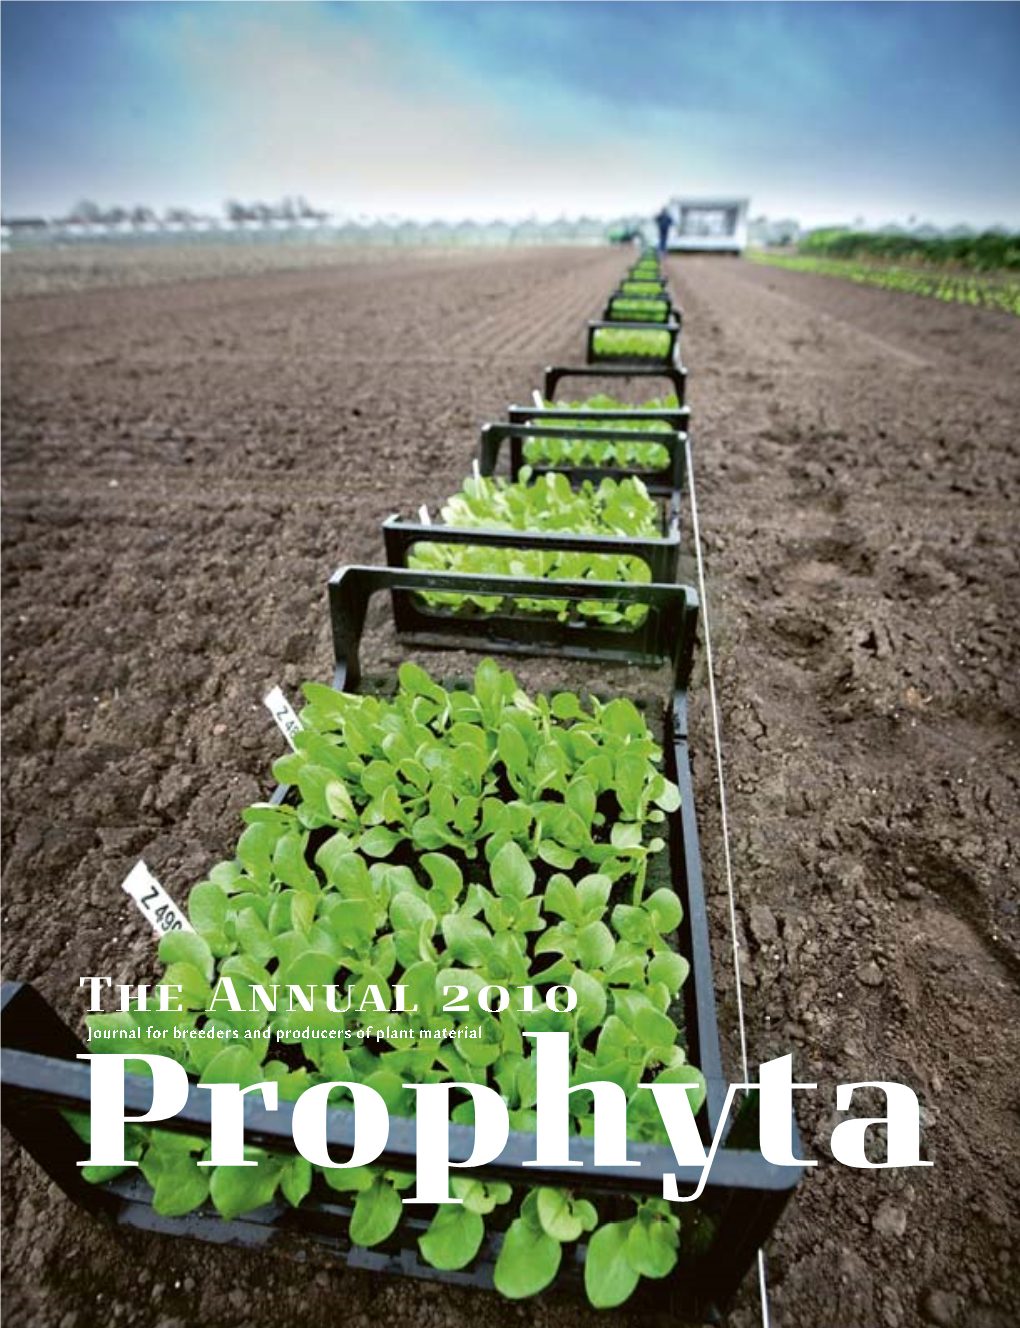 The Annual 2010 Journal for Breeders and Producers of Plant Material